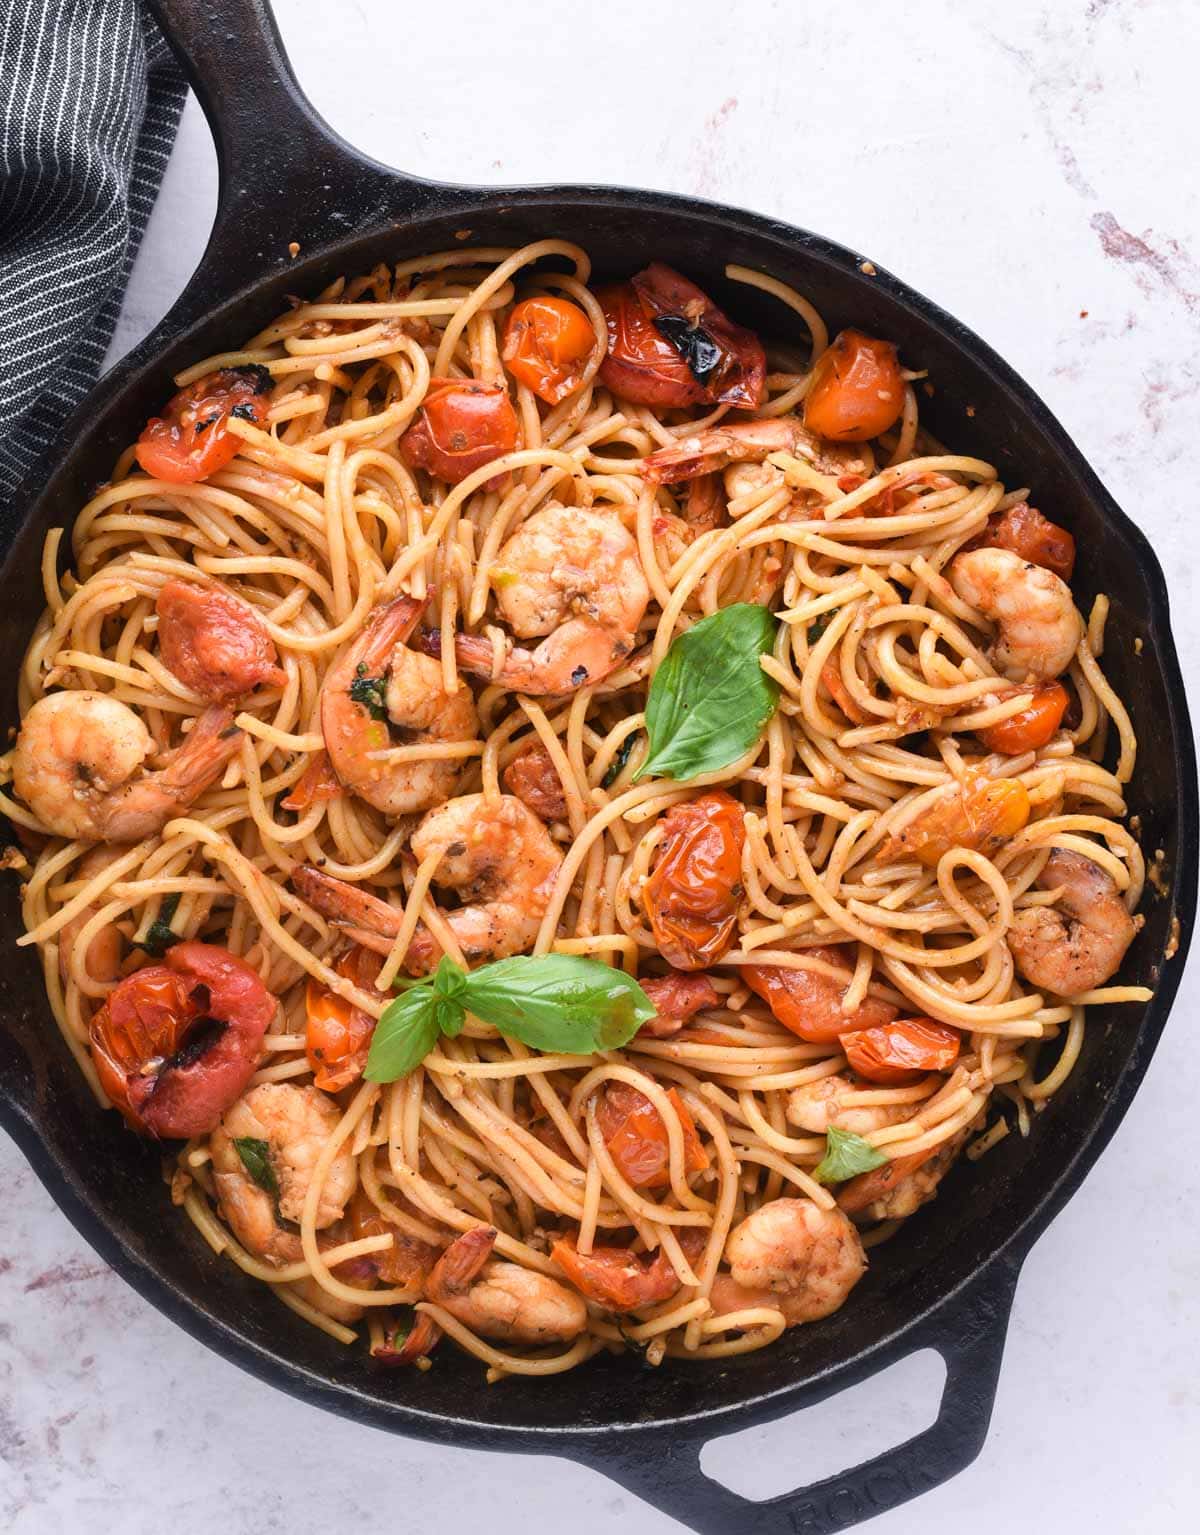 Tomato pasta made with sauce from fresh cherry tomatoes and mixed with fried shrimps. Fresh basil garnished on top.